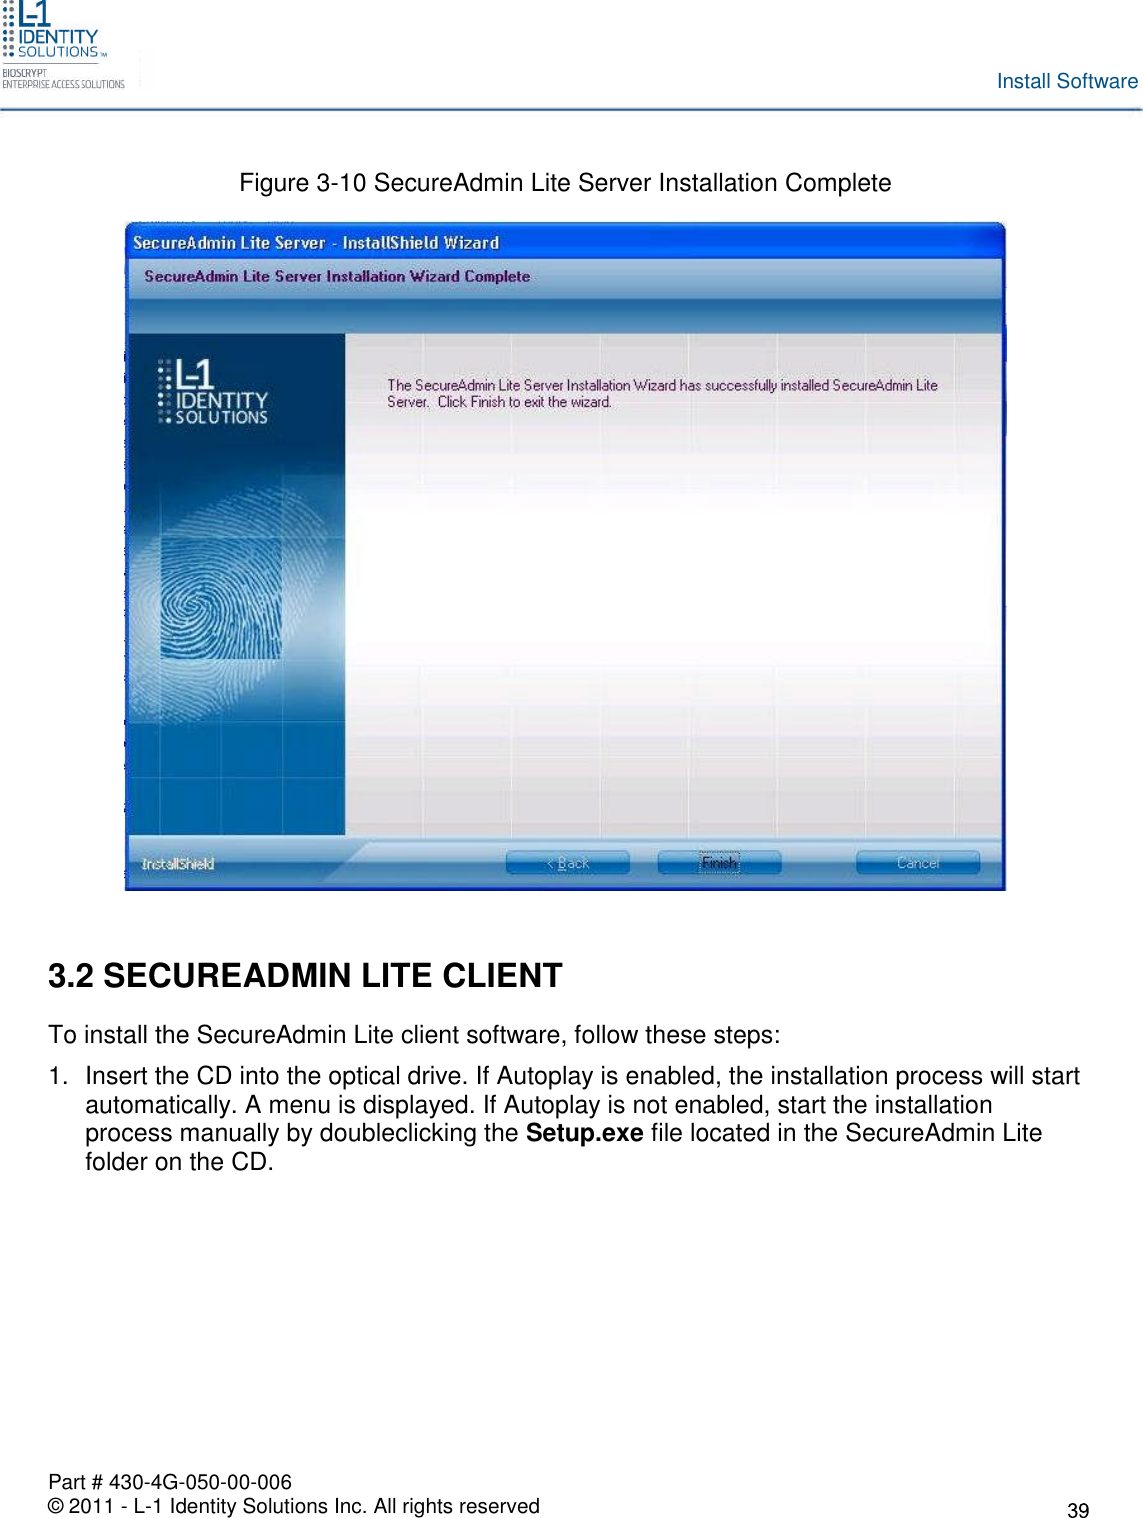 Part # 430-4G-050-00-006© 2011 - L-1 Identity Solutions Inc. All rights reservedInstall SoftwareFigure 3-10 SecureAdmin Lite Server Installation Complete3.2 SECUREADMIN LITE CLIENTTo install the SecureAdmin Lite client software, follow these steps:1. Insert the CD into the optical drive. If Autoplay is enabled, the installation process will startautomatically. A menu is displayed. If Autoplay is not enabled, start the installationprocess manually by doubleclicking the Setup.exe file located in the SecureAdmin Litefolder on the CD.